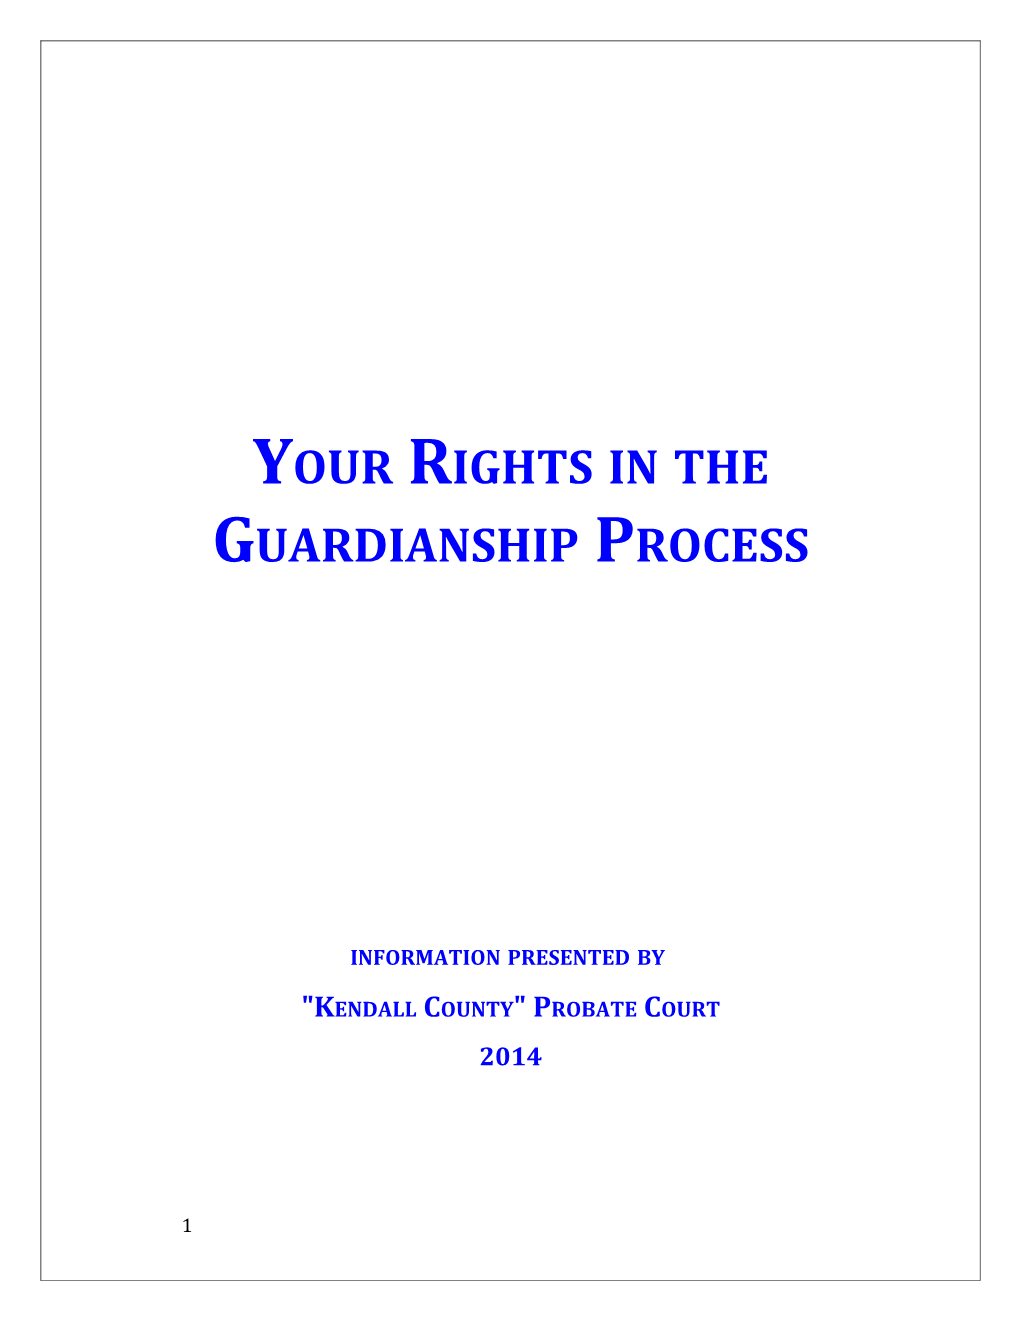 Your Rights in the Guardianship Process